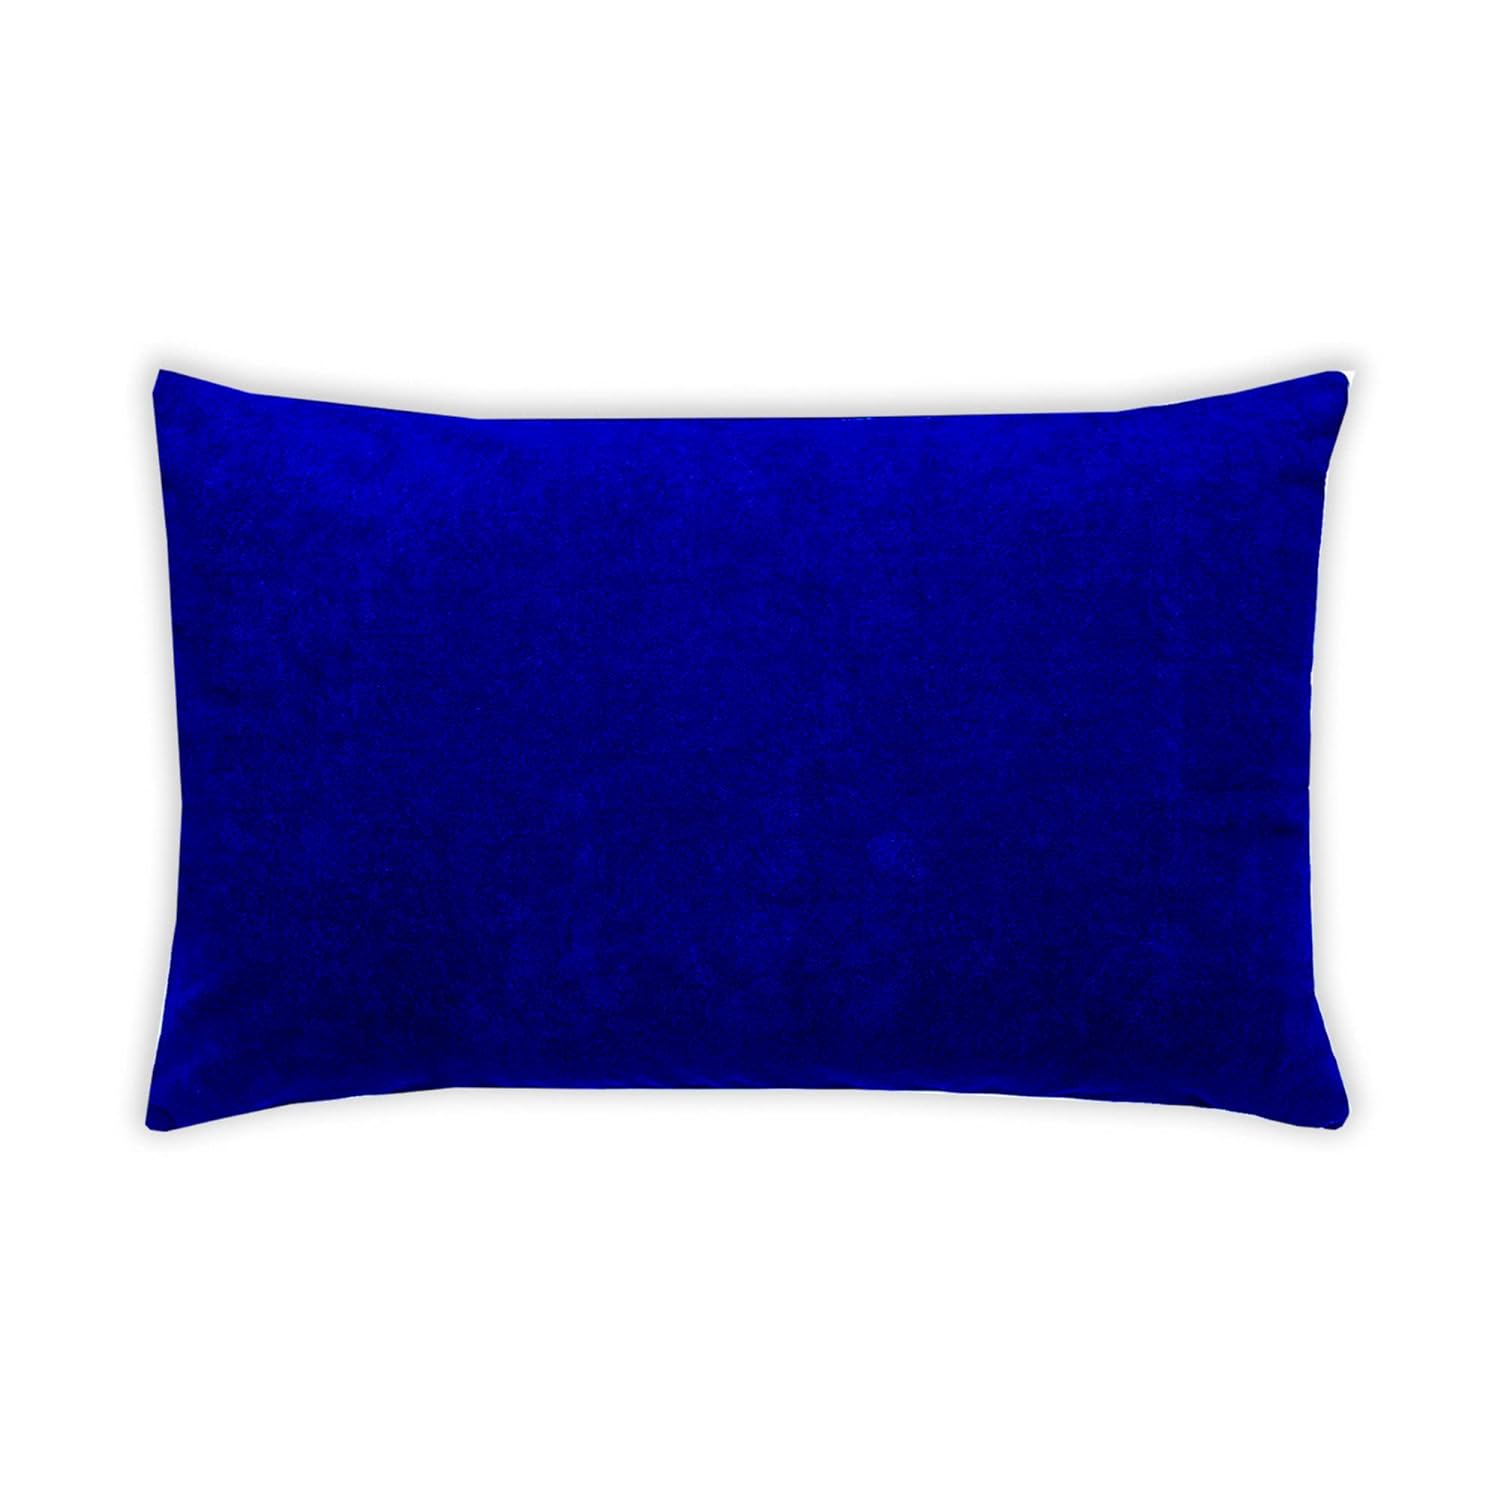 GADDA CO Dust Mite and Bed Bug Resistant Pillow Cover, Zippered Pillowcase for Waterproof Protection - Standard Size 18 X 28 Inch - Royal Blue - Set of 1